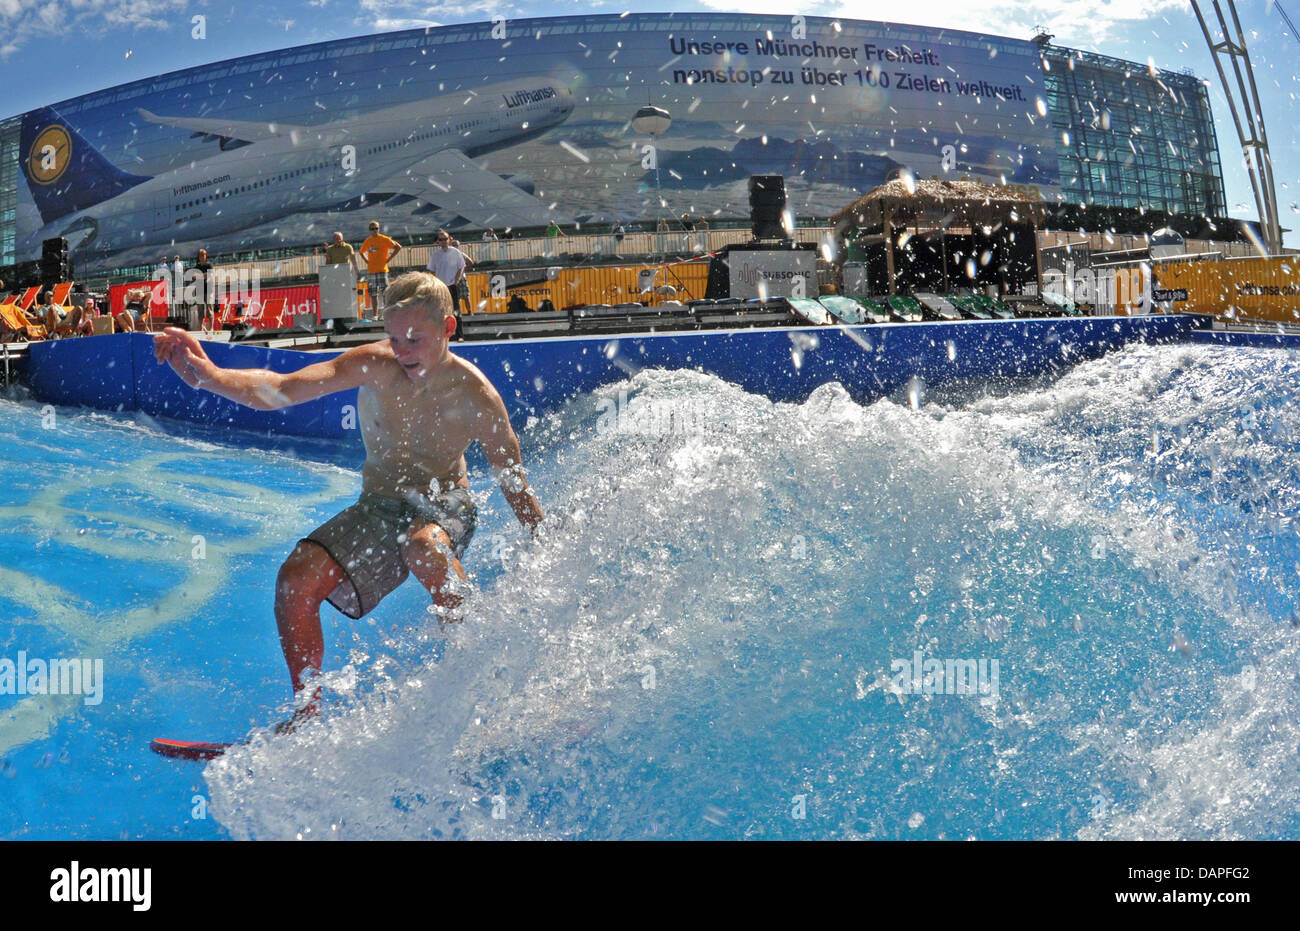 A man surfs on an artificial wave at an open area of the airport in Munich, Germany, 18 August 2011. The largest and only standing wave at an airport, acorrding to the organisers, can be visited and surfed until 28 August 2011. professionals and amateurs can show their skills at the nine metre wide and up to 1.5m high wave. Photo: Peter Kneffel Stock Photo